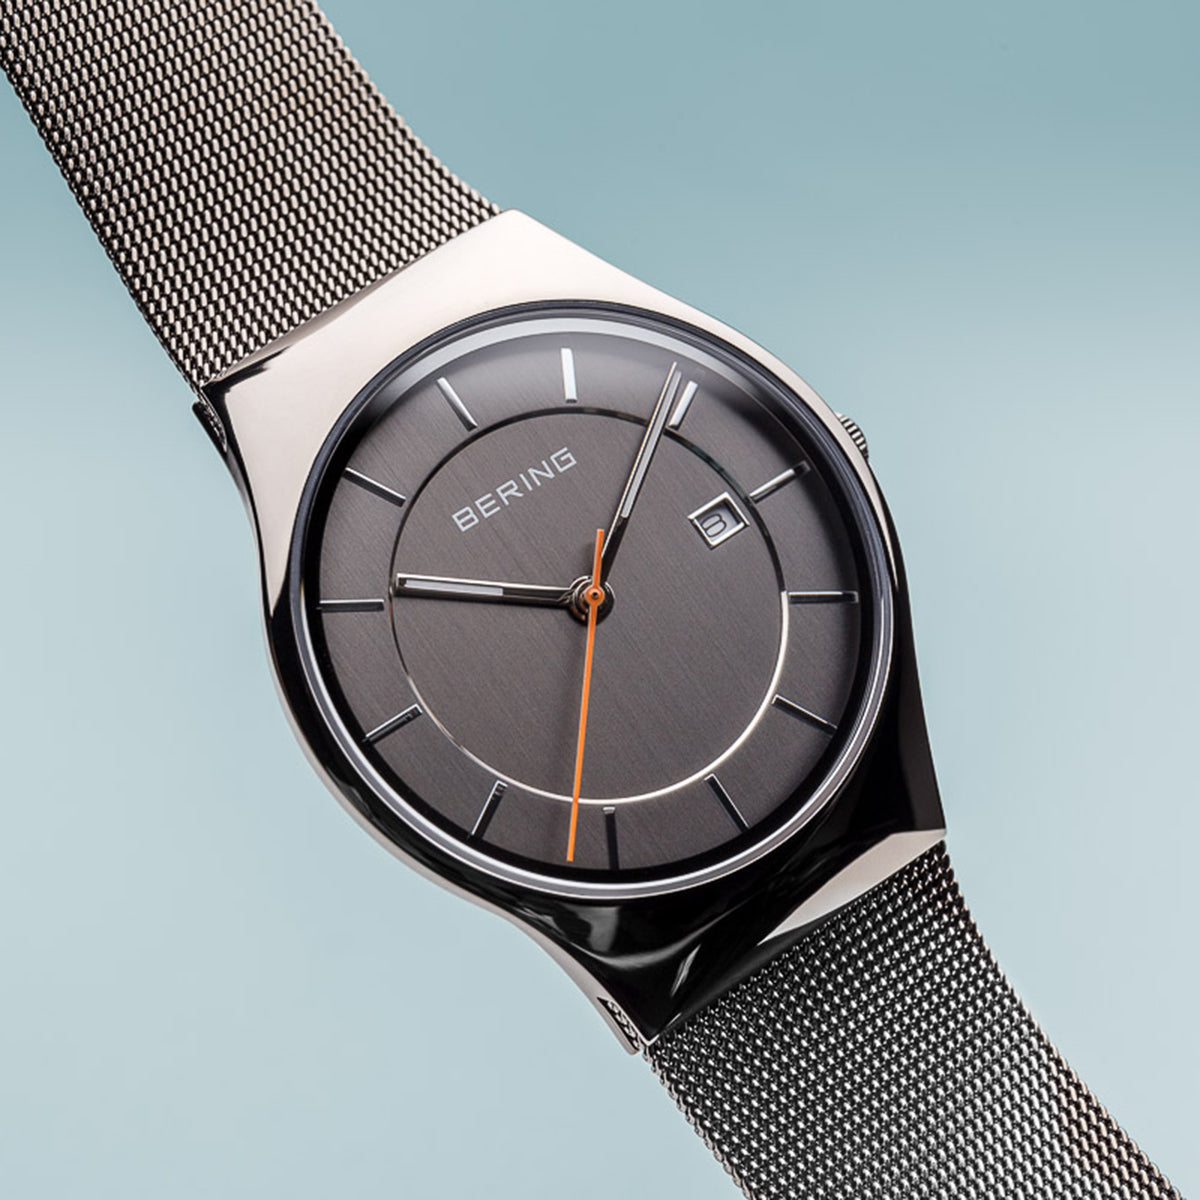 Bering Classic Polished Silver Mesh Watch